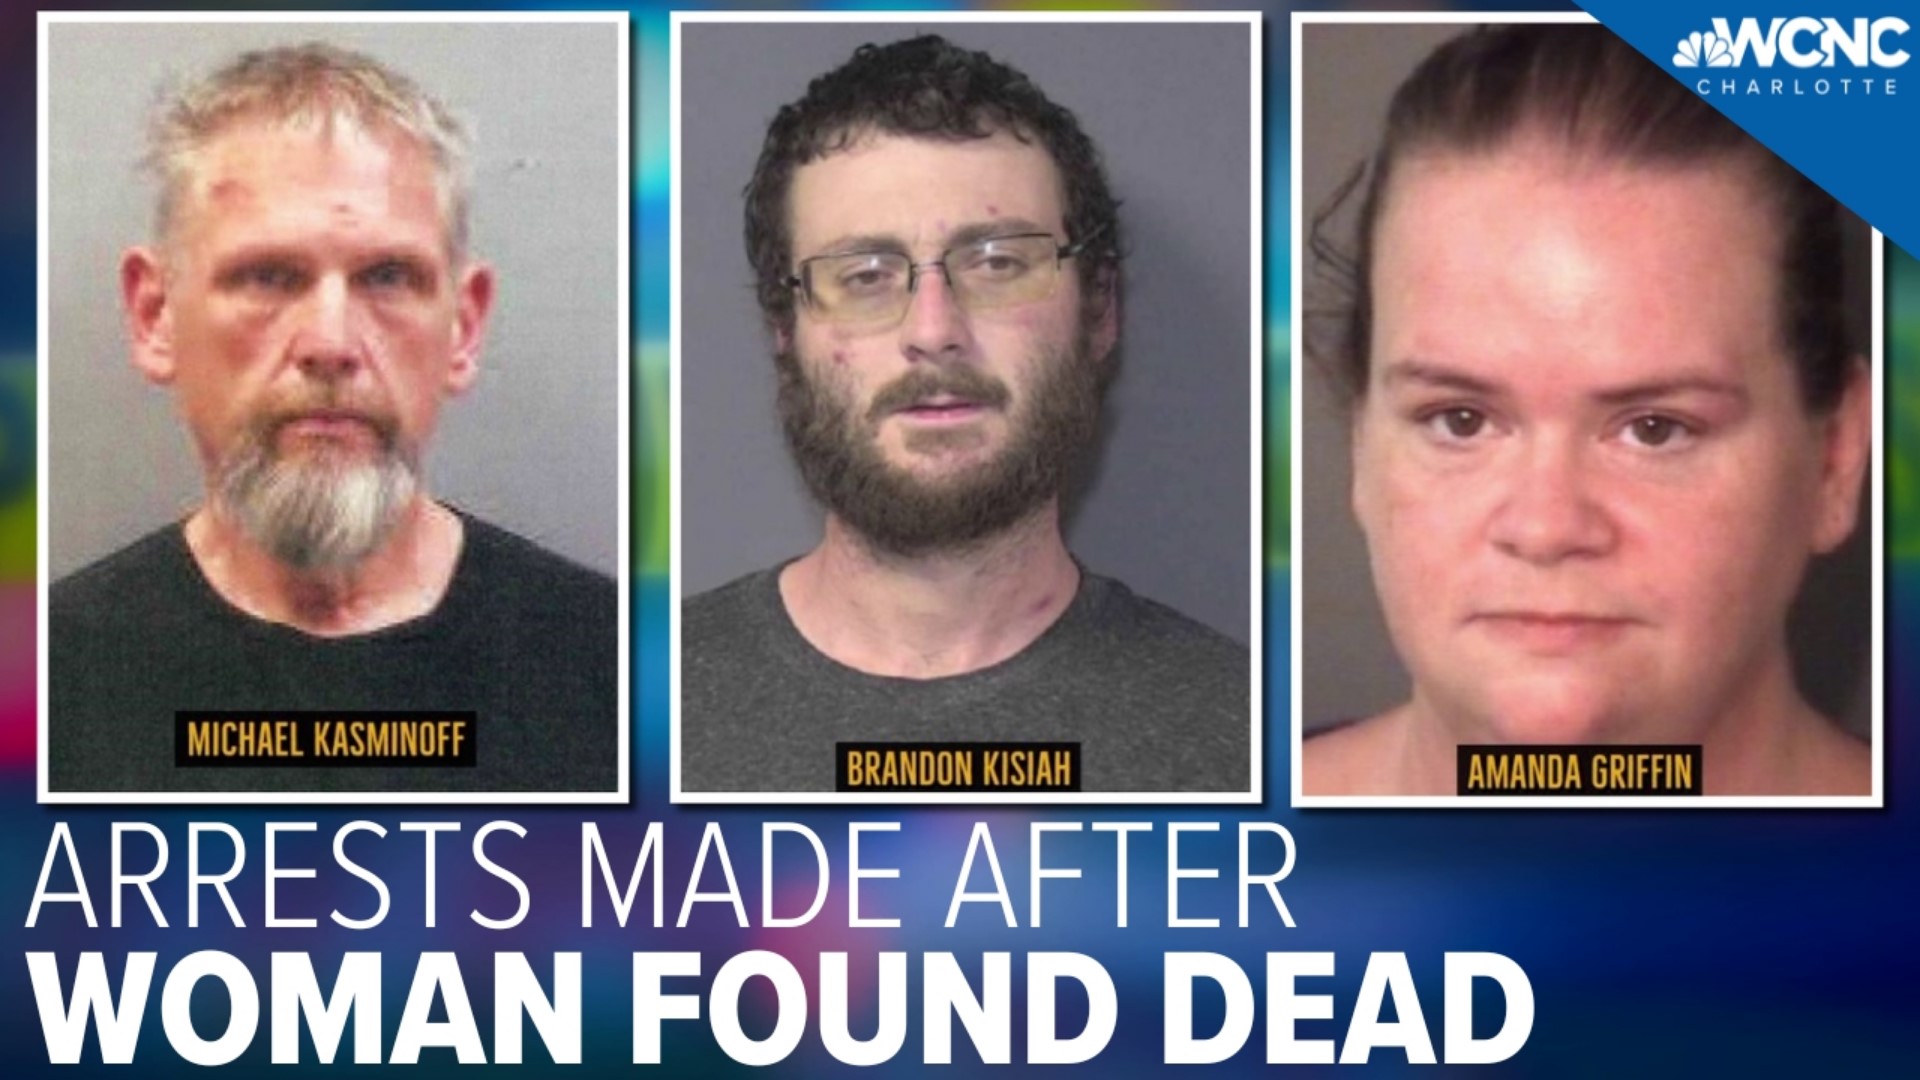 Over a month after a woman was reported missing in Union County, three people have been arrested for her death.